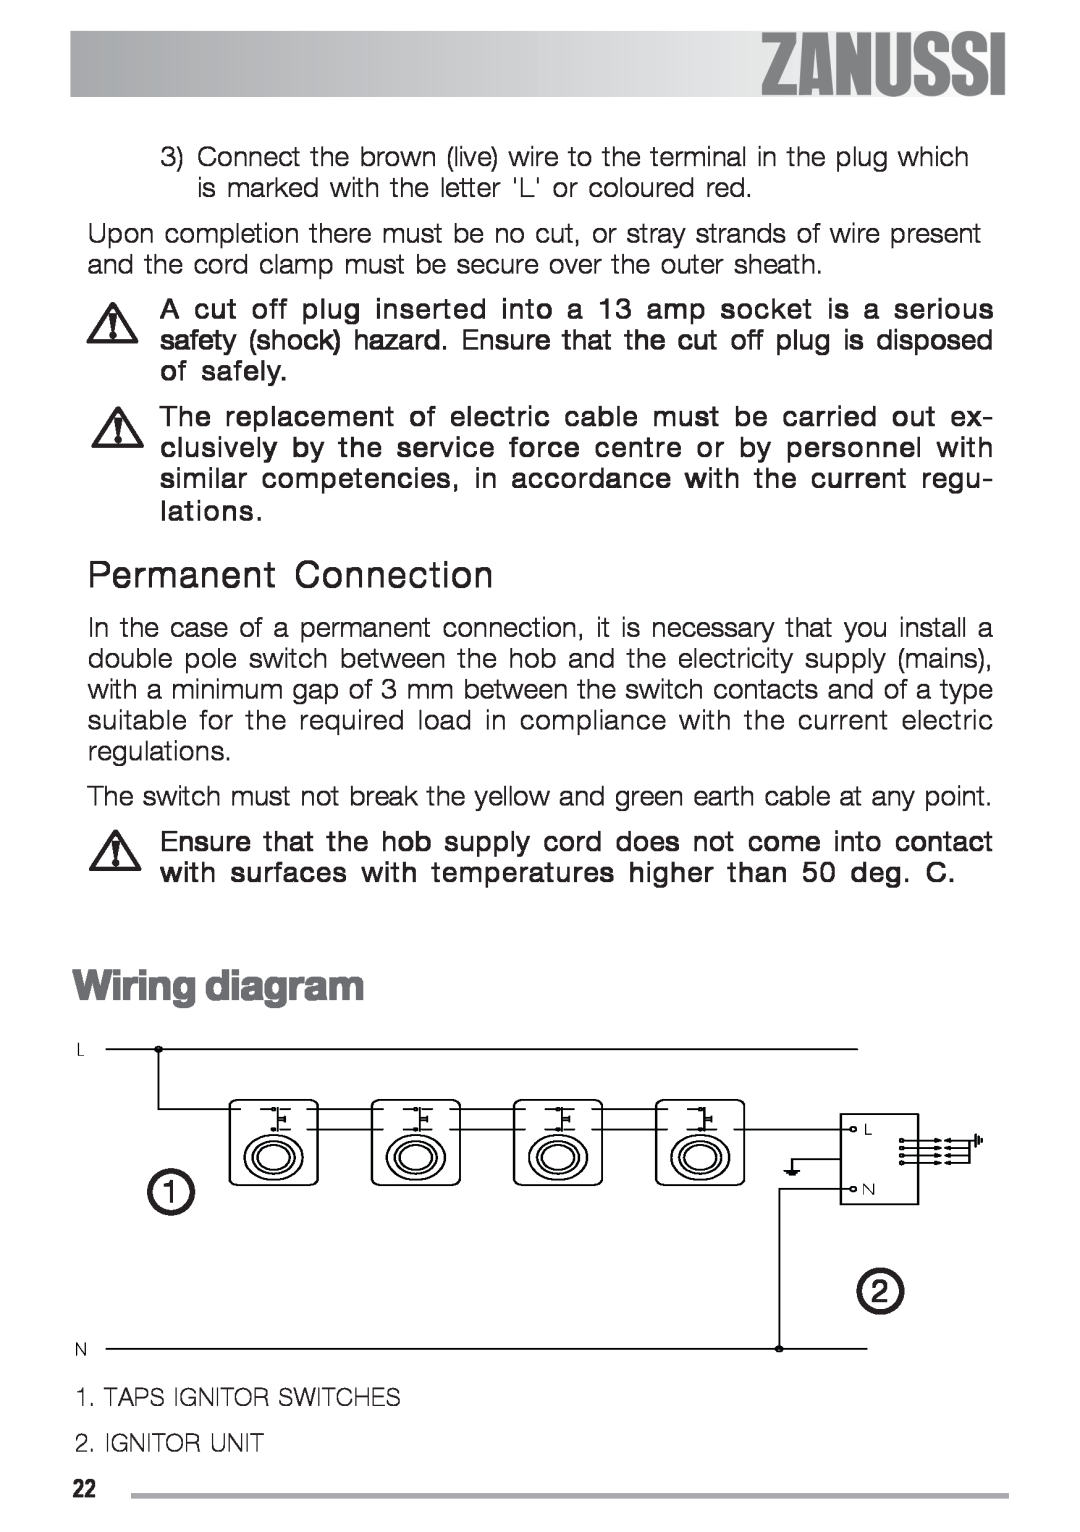 Zanussi ZGF 692 CT manual Wiring diagram, Permanent Connection 